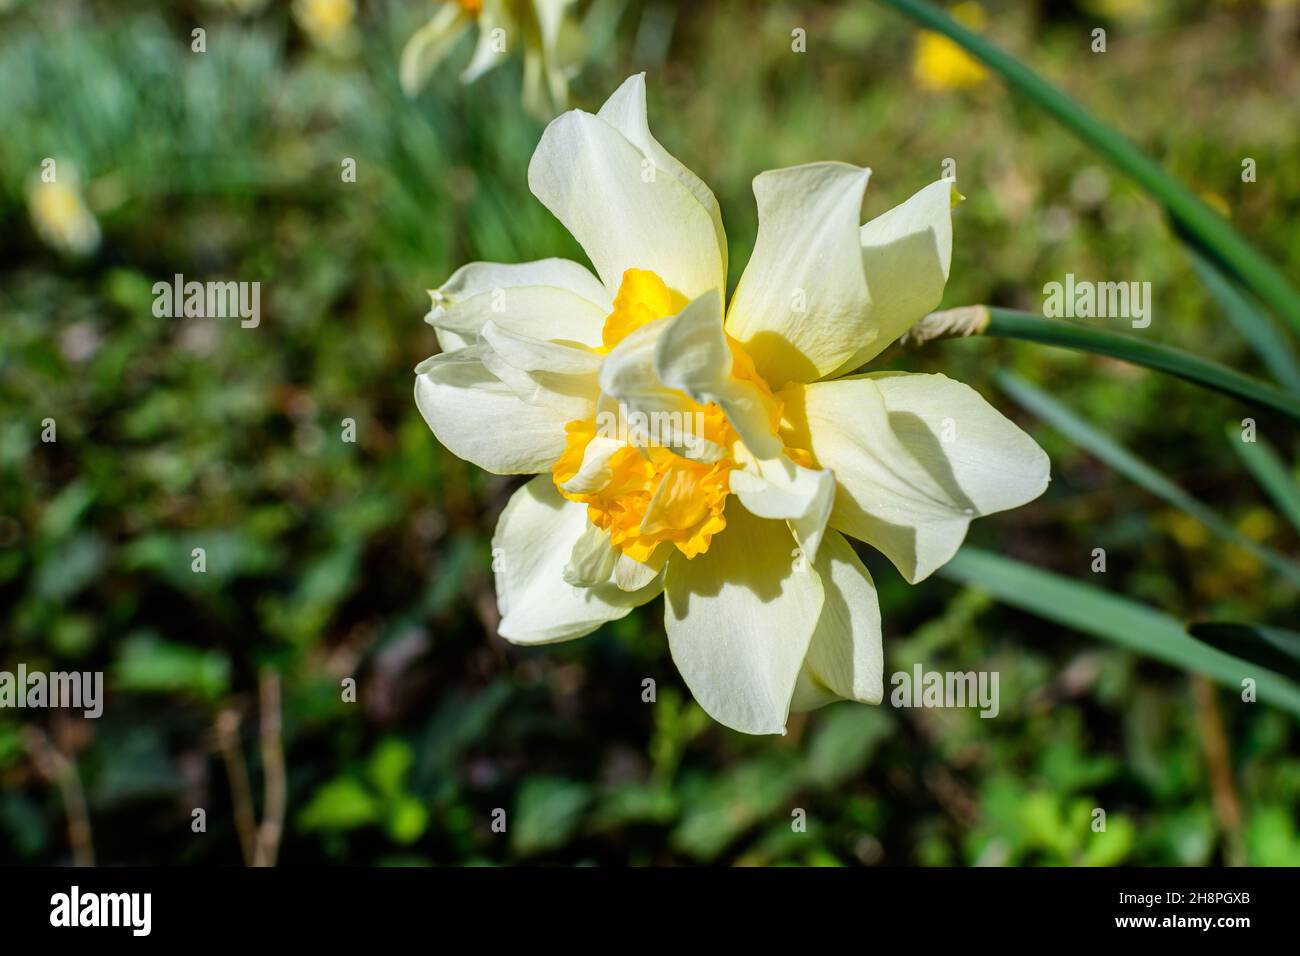 One delicate white and vidid yellow daffodil flower in full bloom with blurred green grass, in a sunny spring garden, beautiful outdoor floral backgro Stock Photo